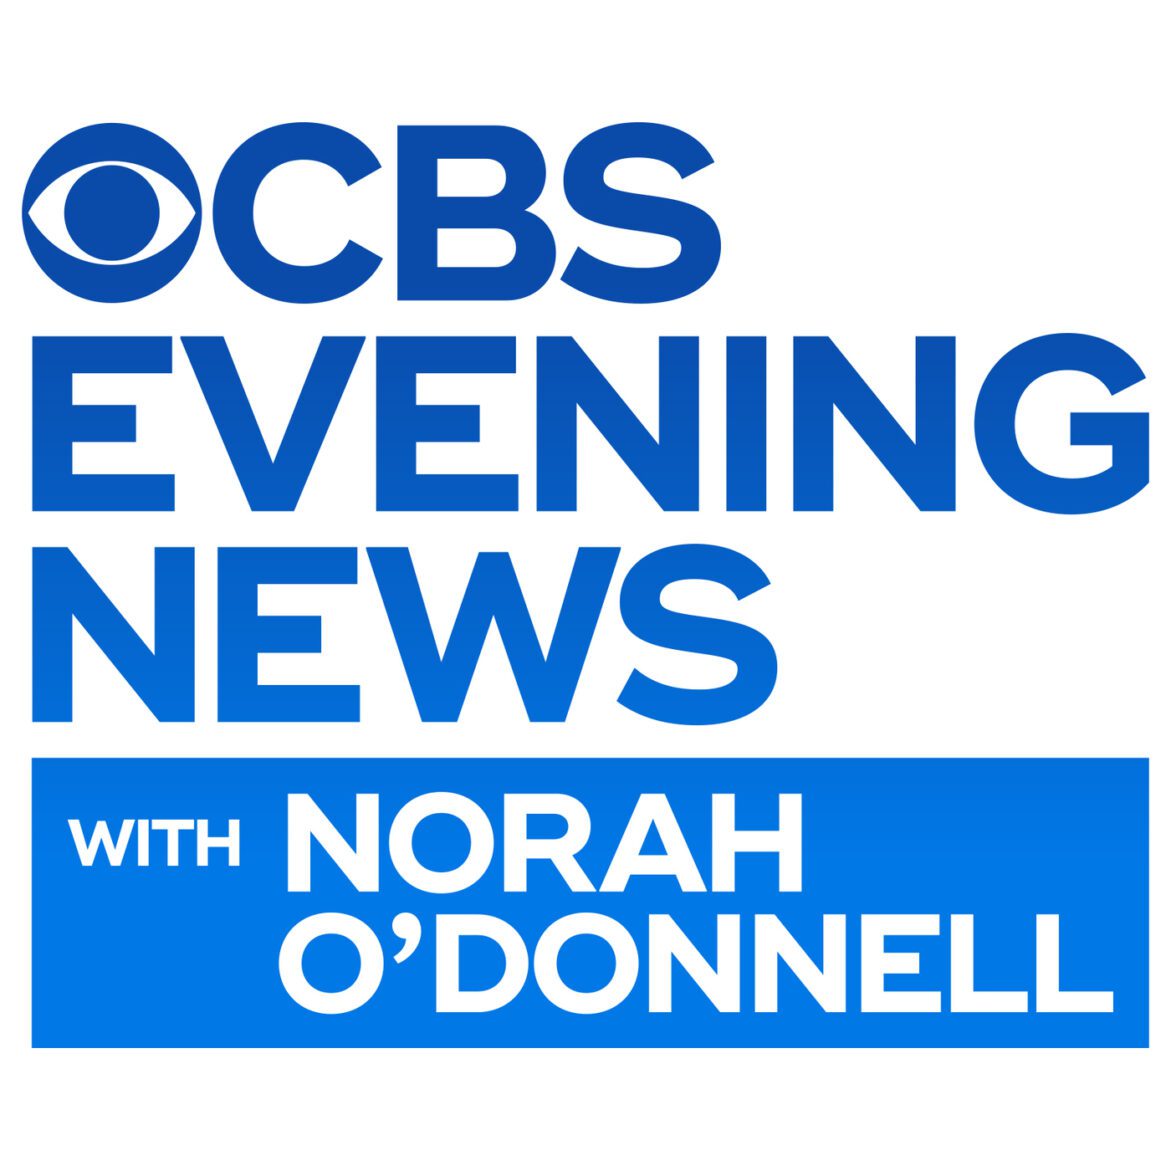 Black Podcasting - CBS Evening News with Norah O'Donnell, 08/17